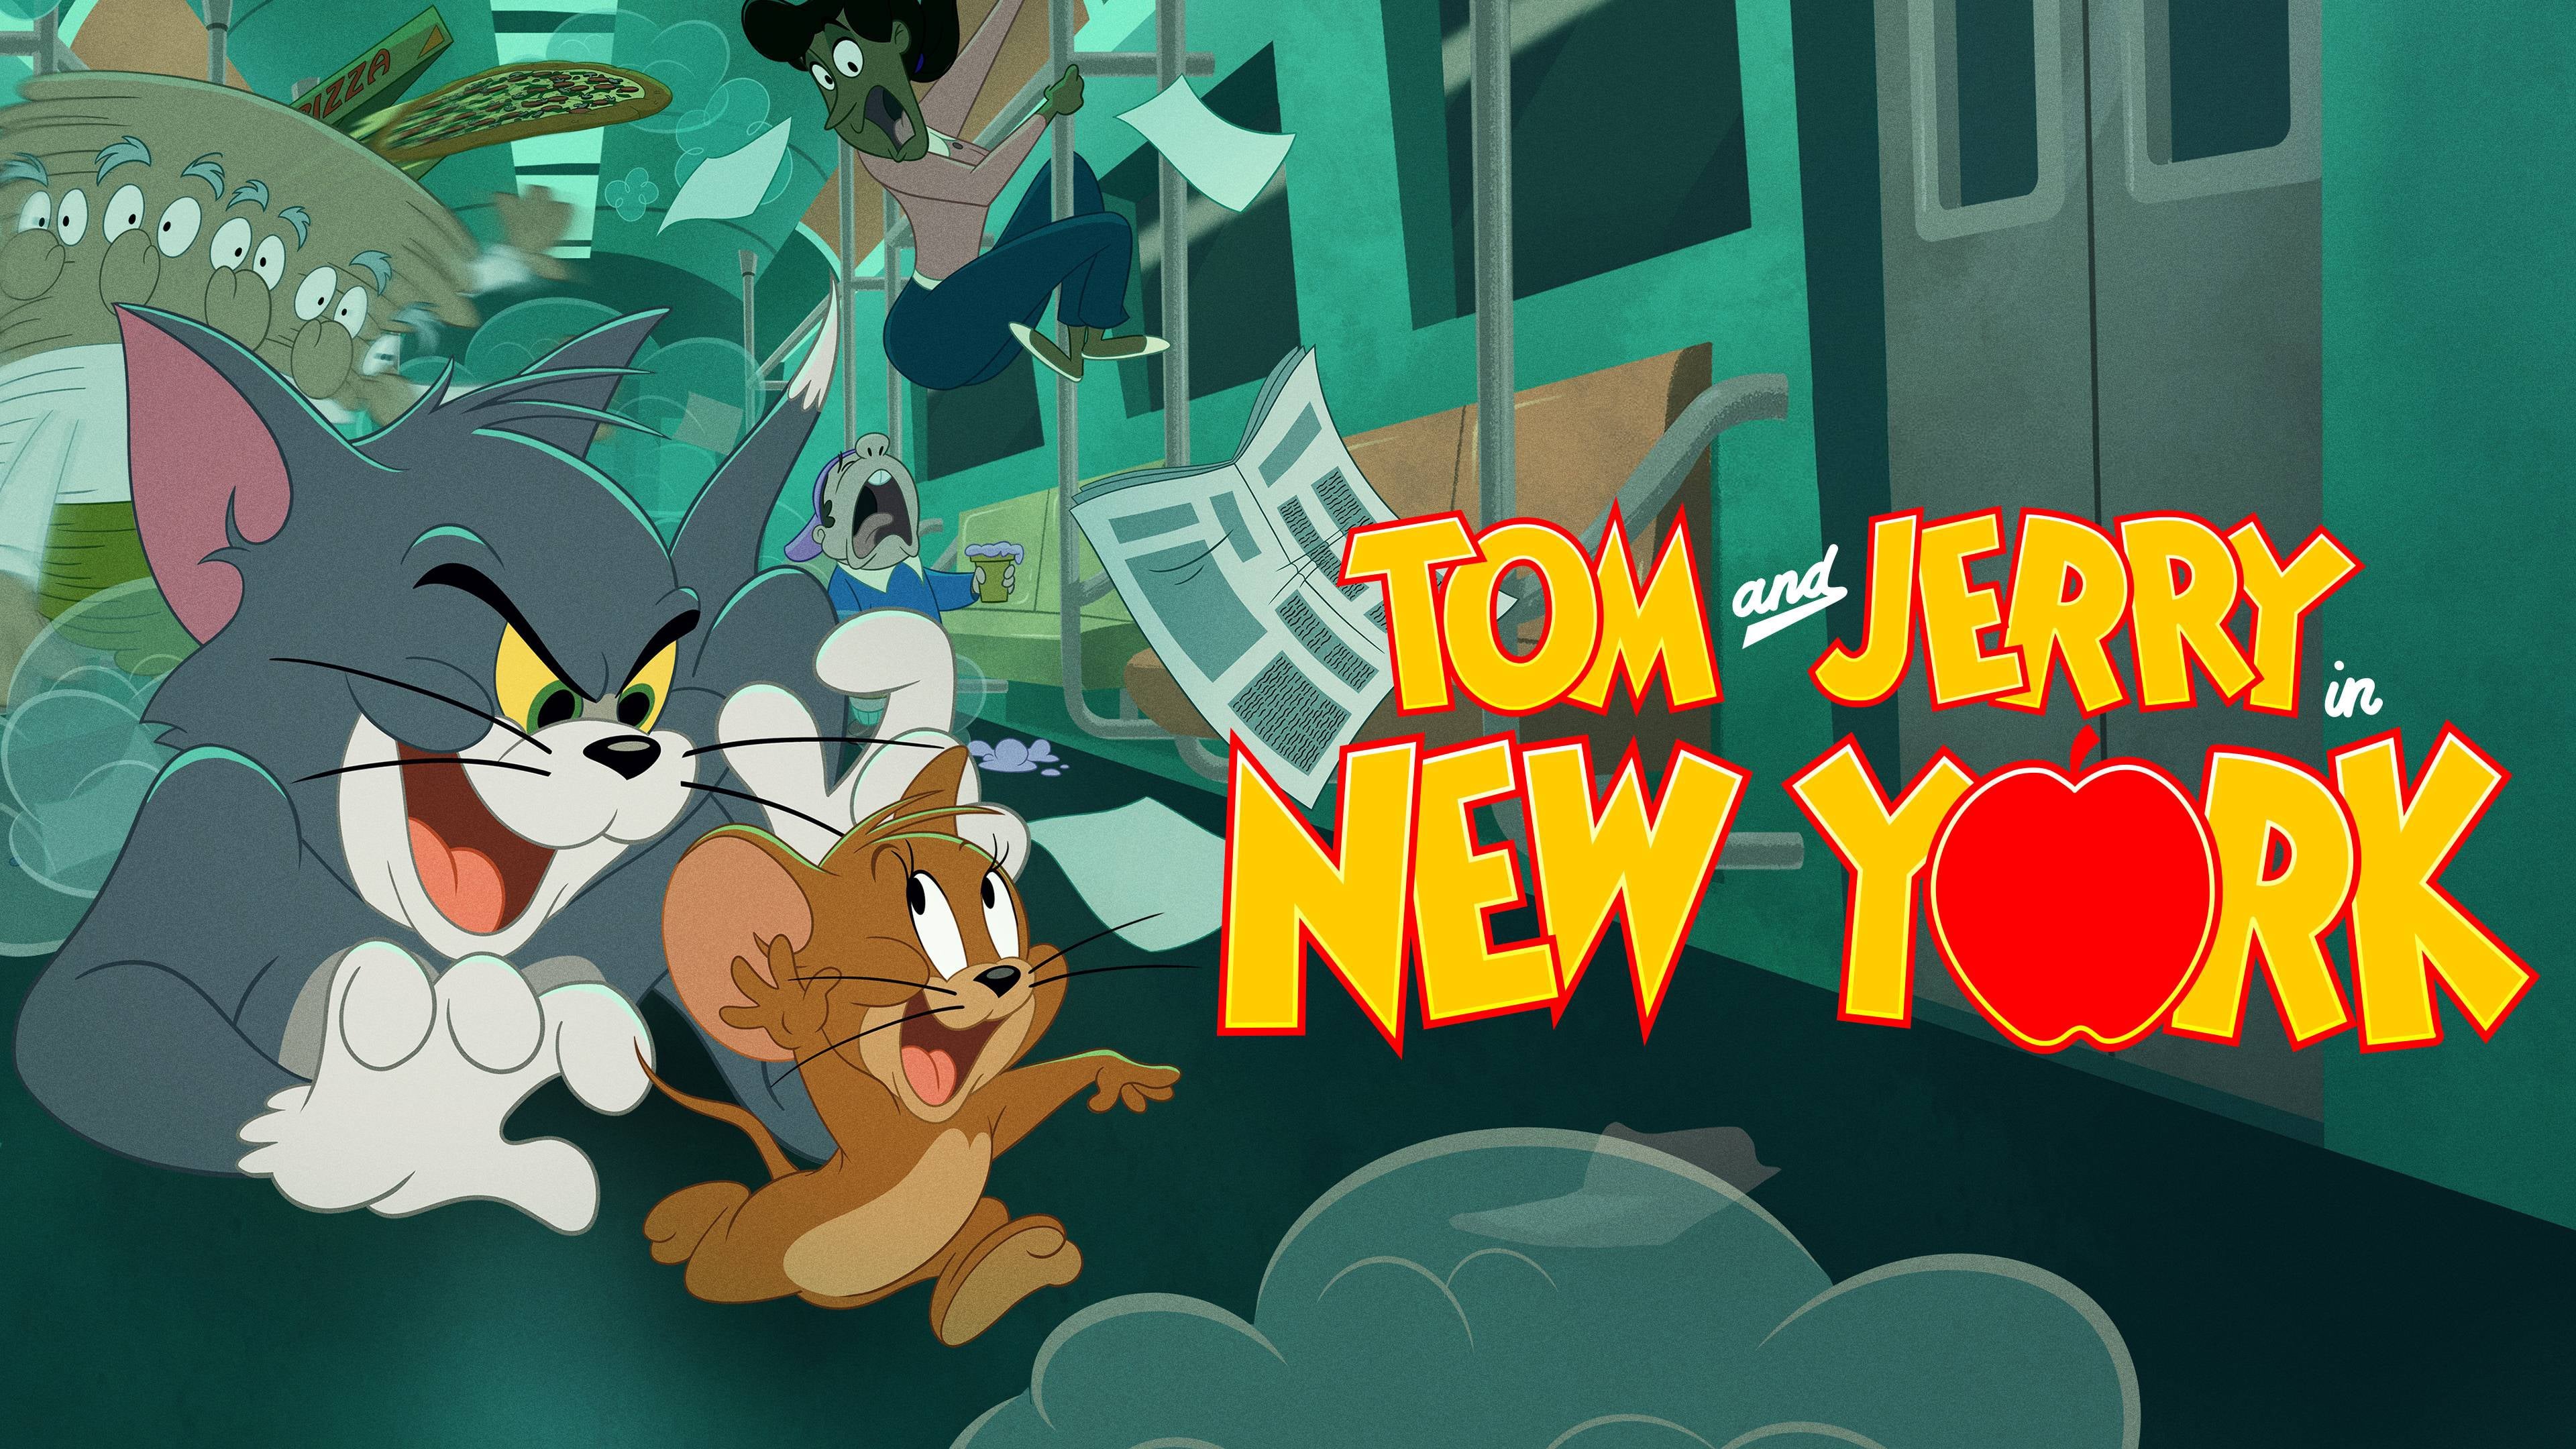 Tom and Jerry in New York Gallery Image